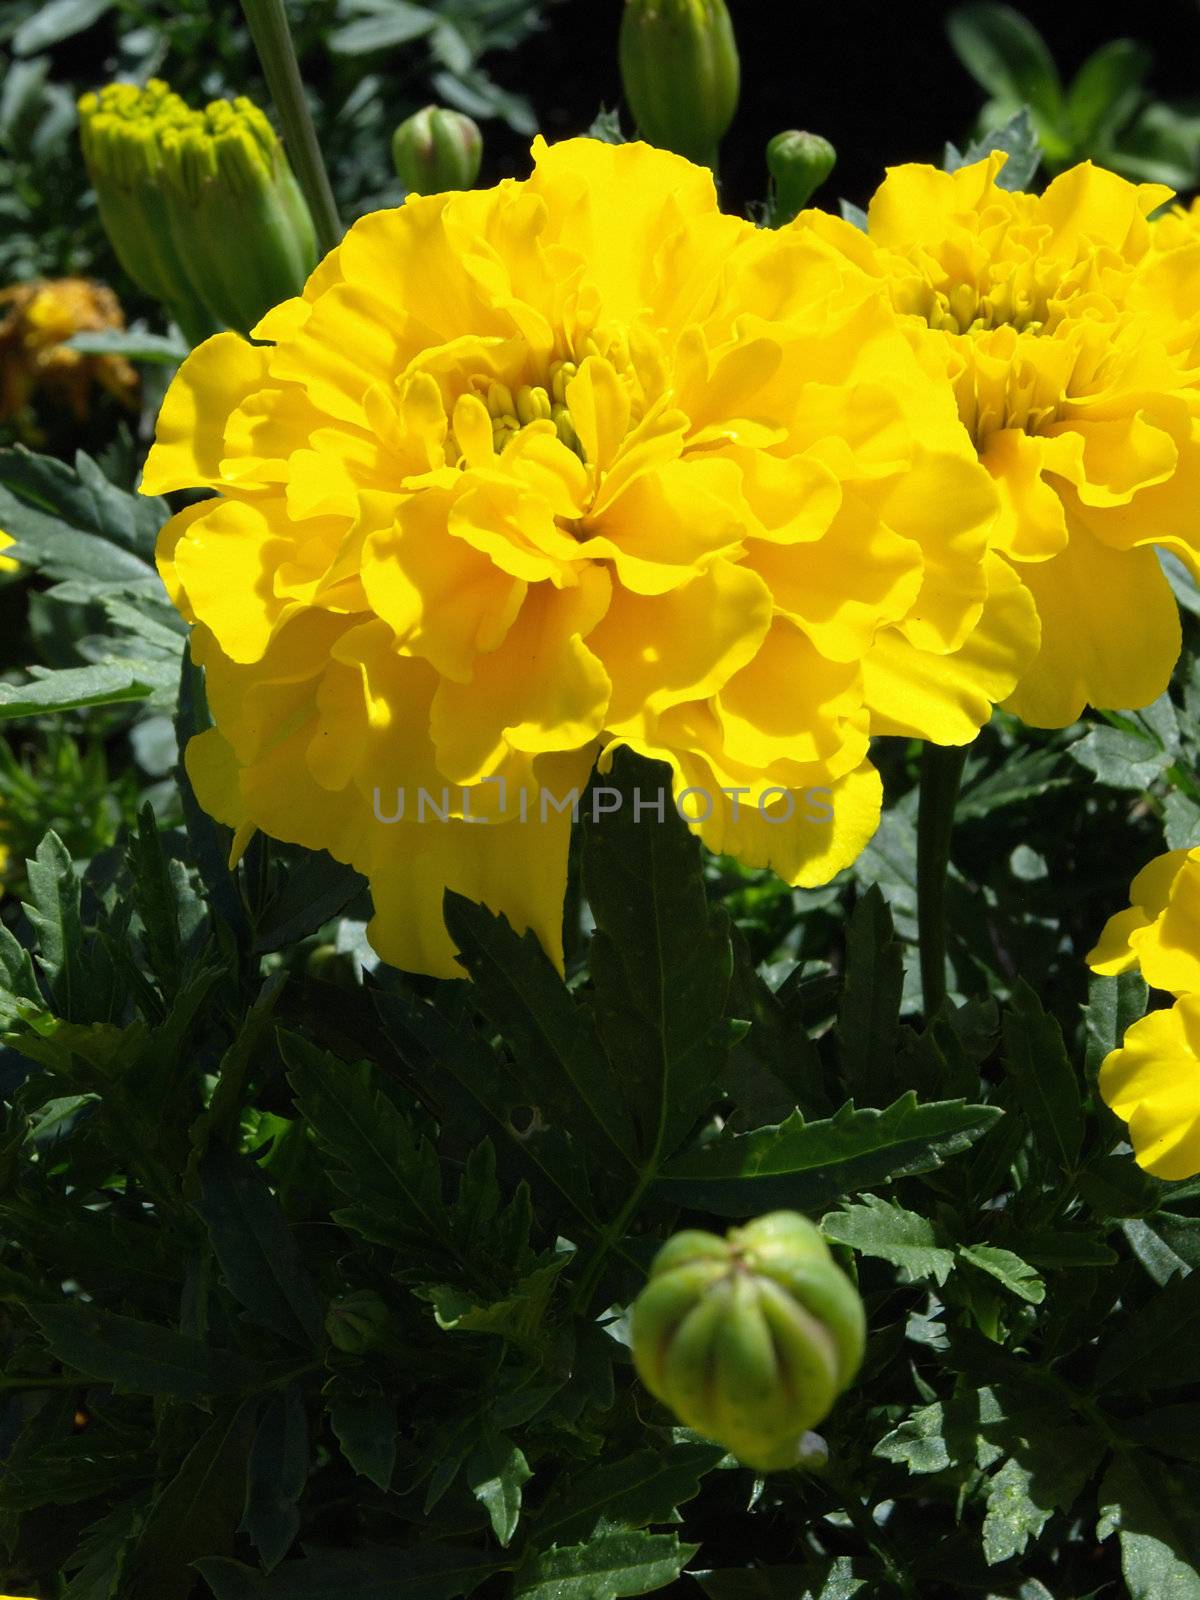 Several yellow marigold flowers growing in a garden.